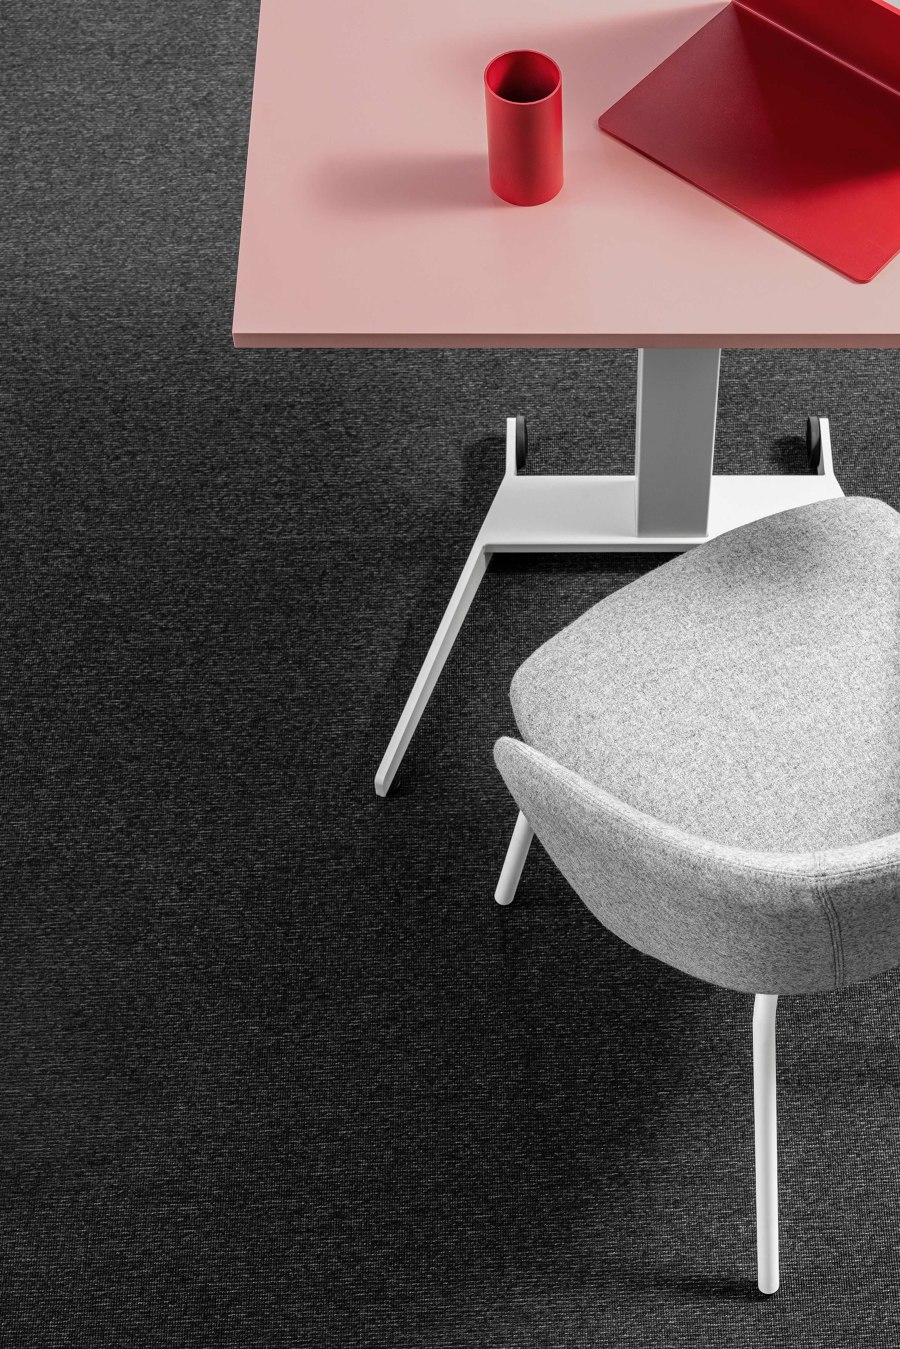 Seating settings for all situations by Mara | Novedades